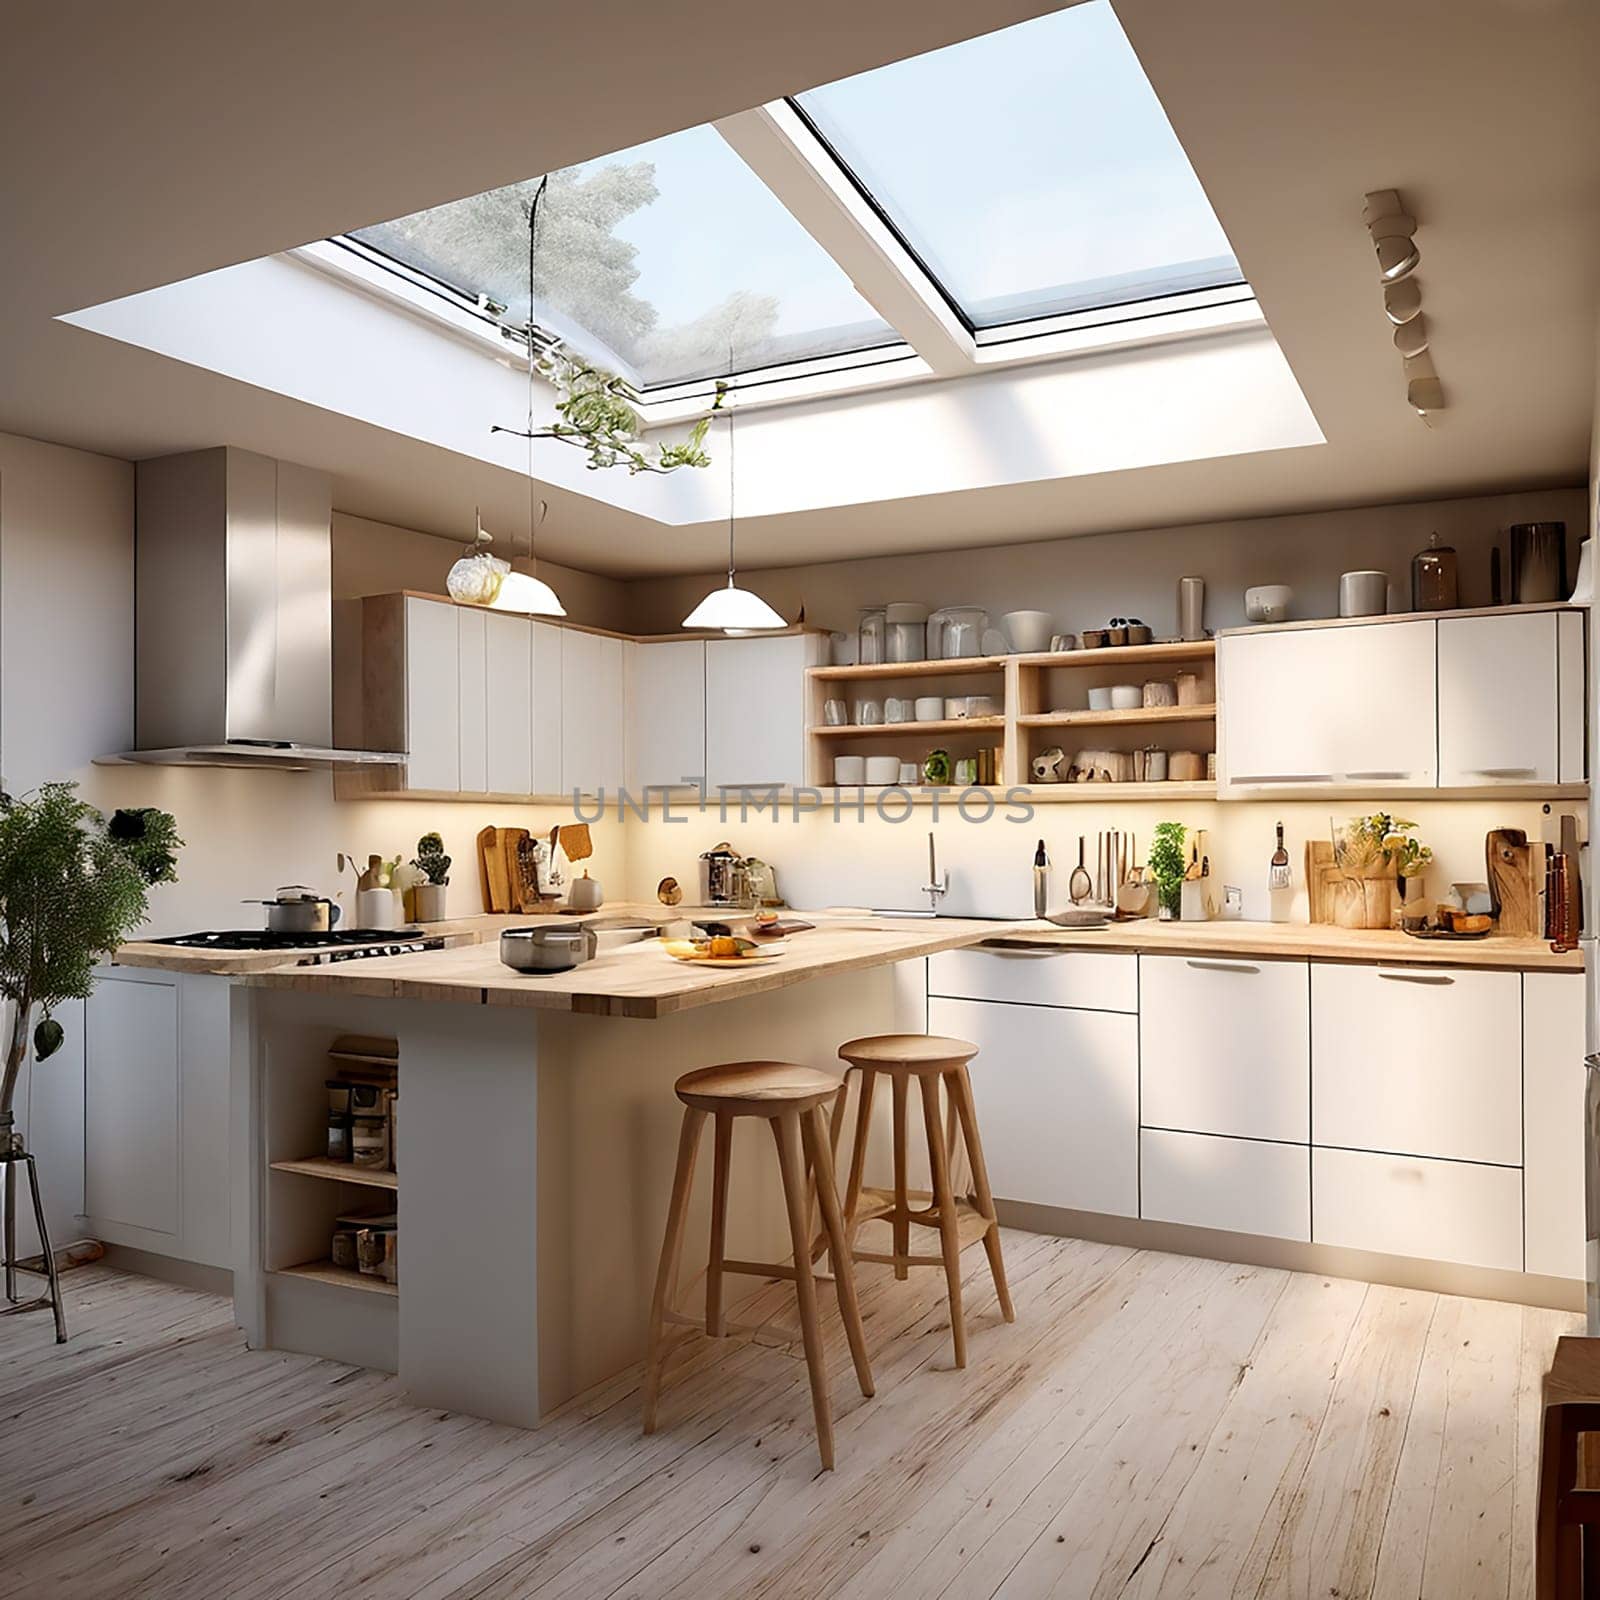 A Kitchen with a View: Designing a Culinary Space that Embraces the Outdoors